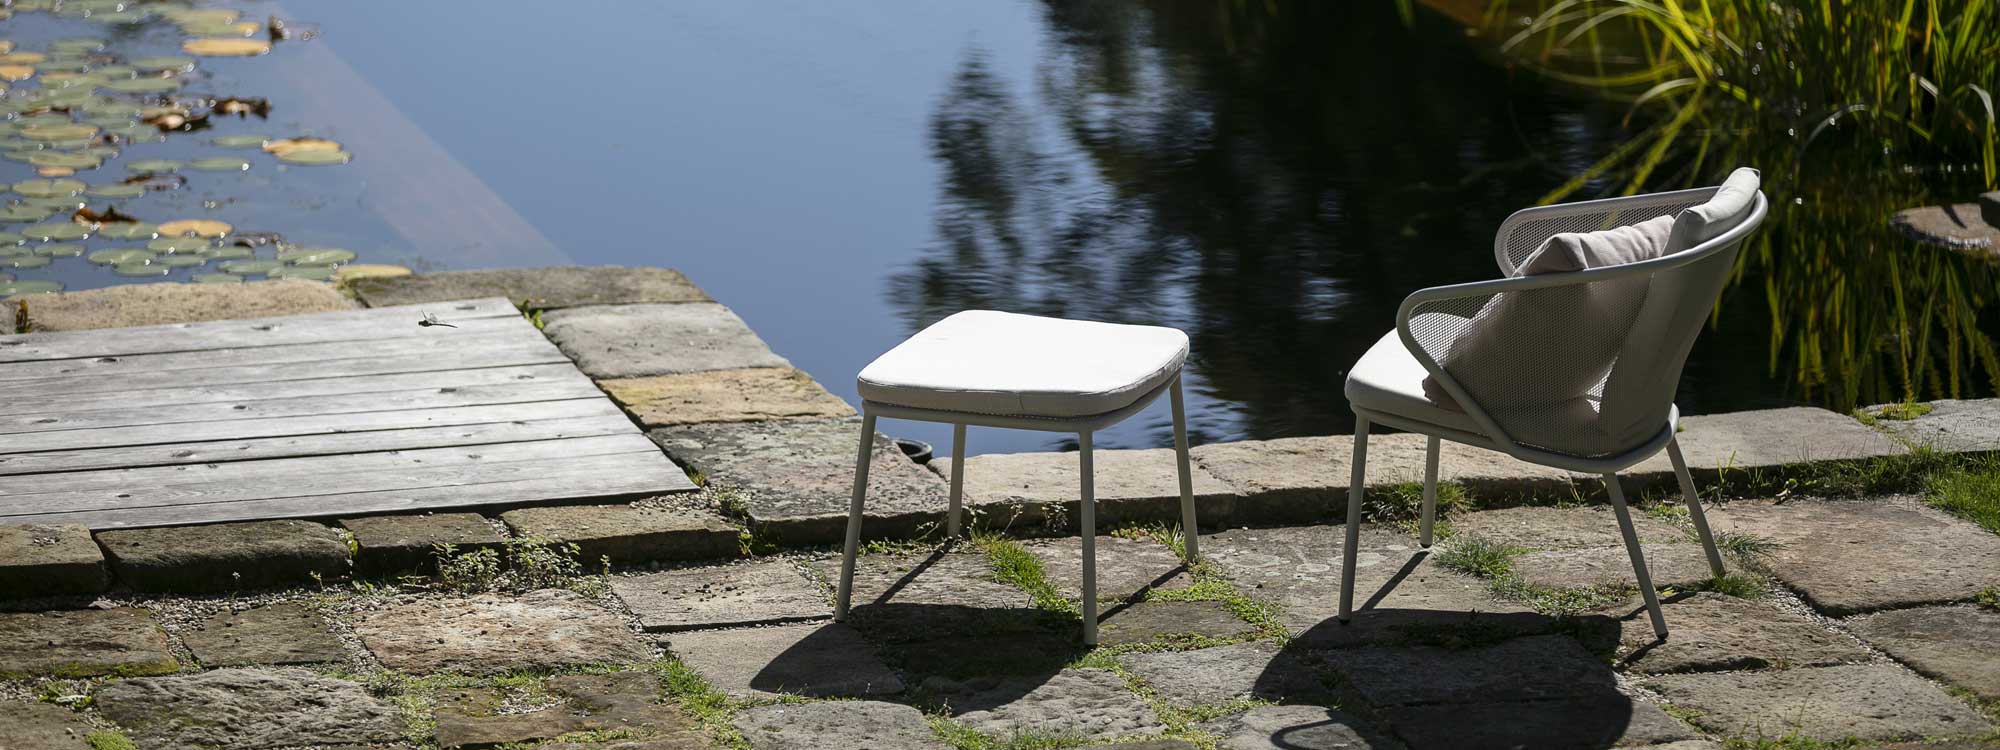 Condor contemporary garden chair and footstool on stone floor by water feature